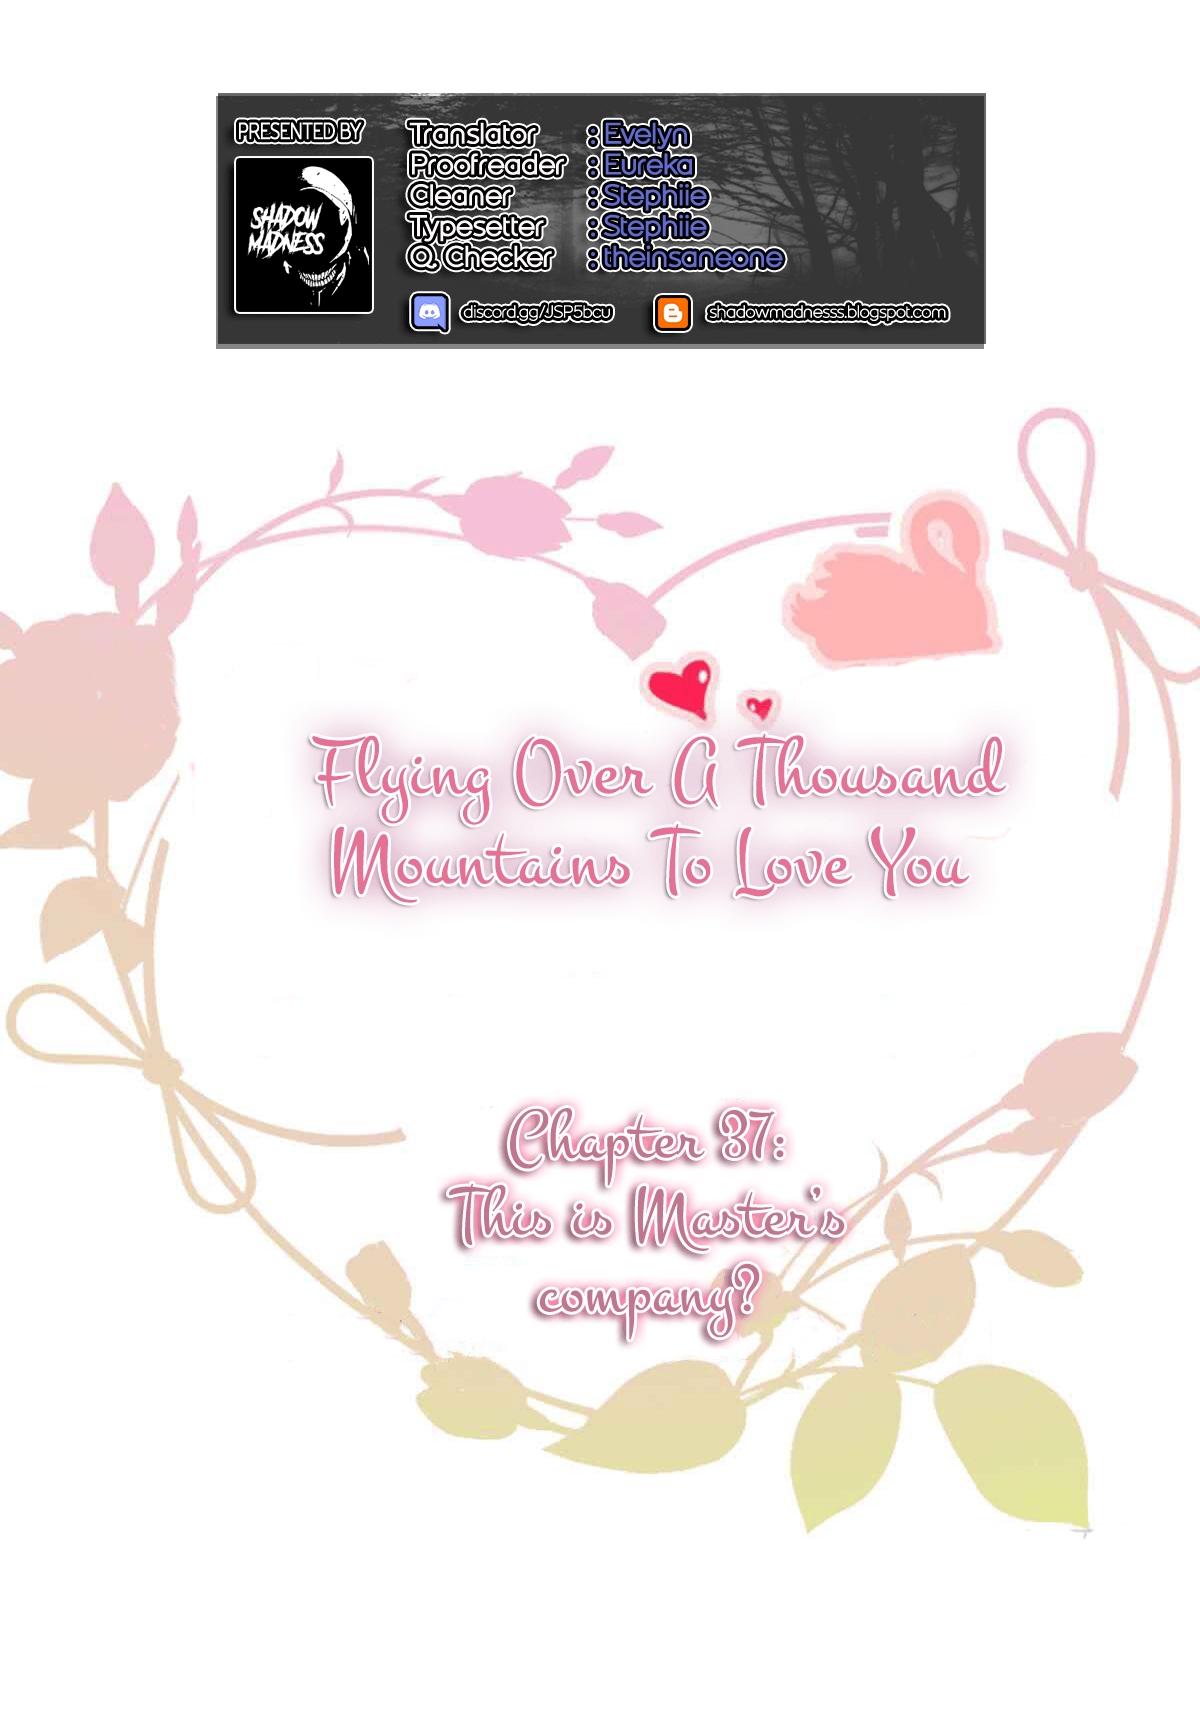 Flying Over a Thousand Mountains to Love You Ch. 37 Is this Master’s company?